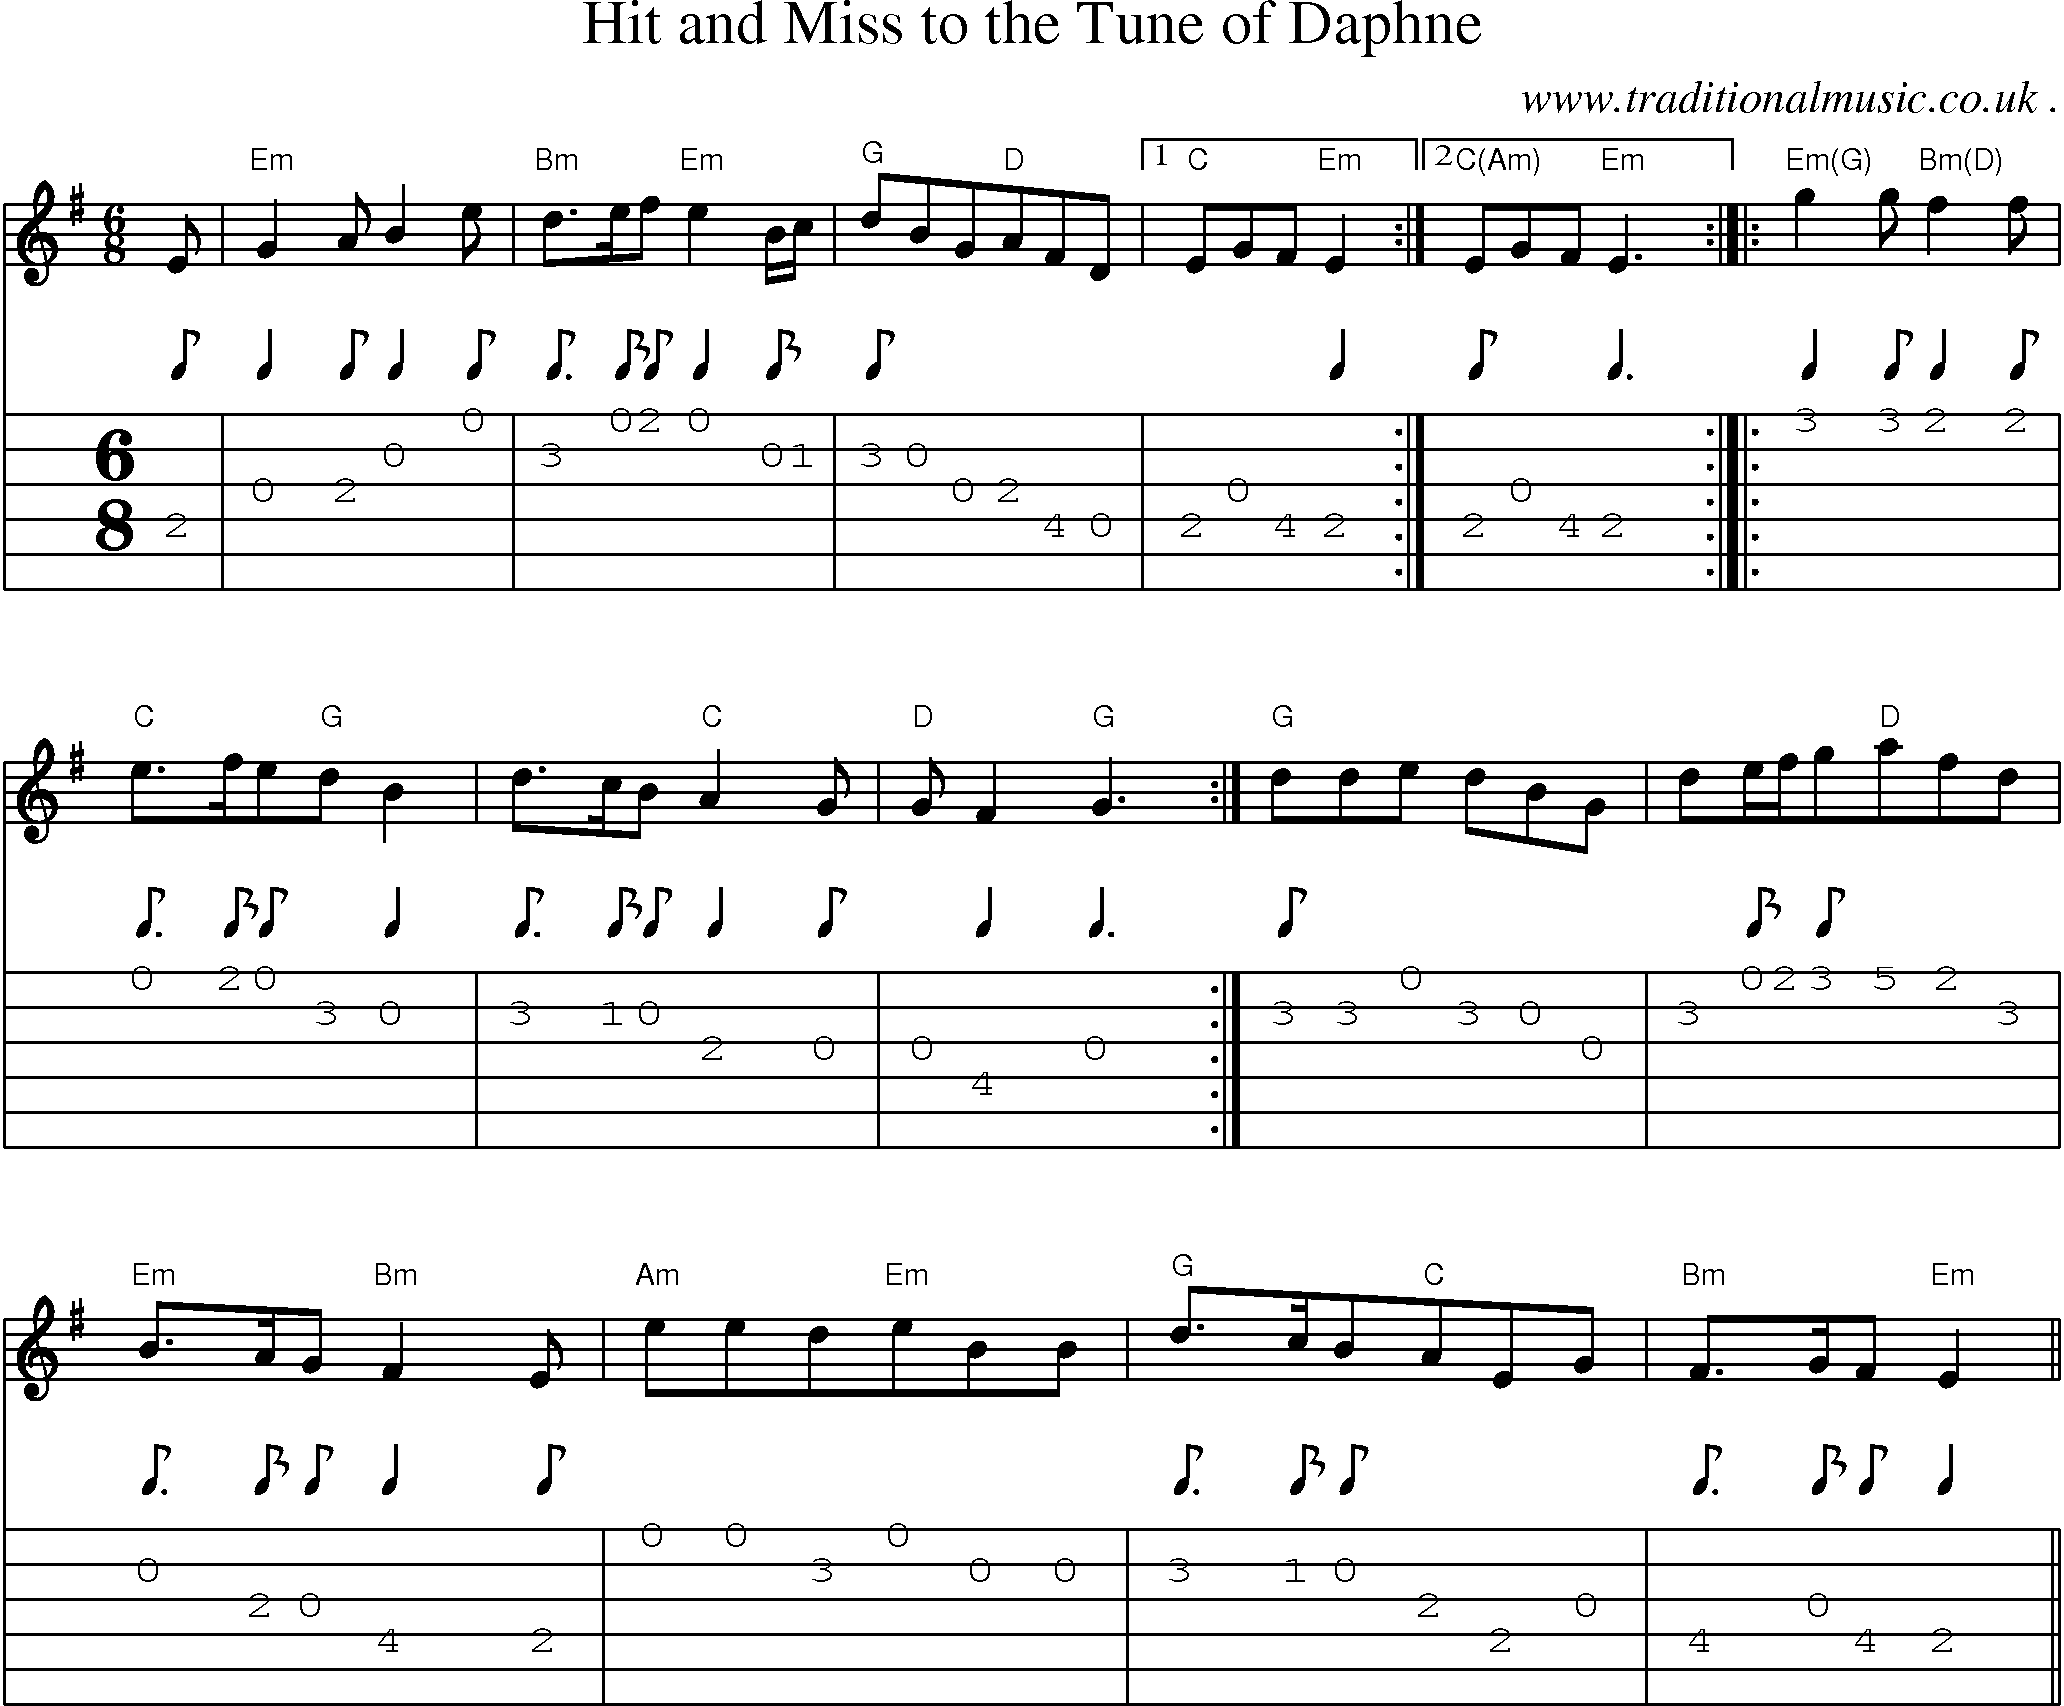 Sheet-Music and Guitar Tabs for Hit And Miss To The Tune Of Daphne